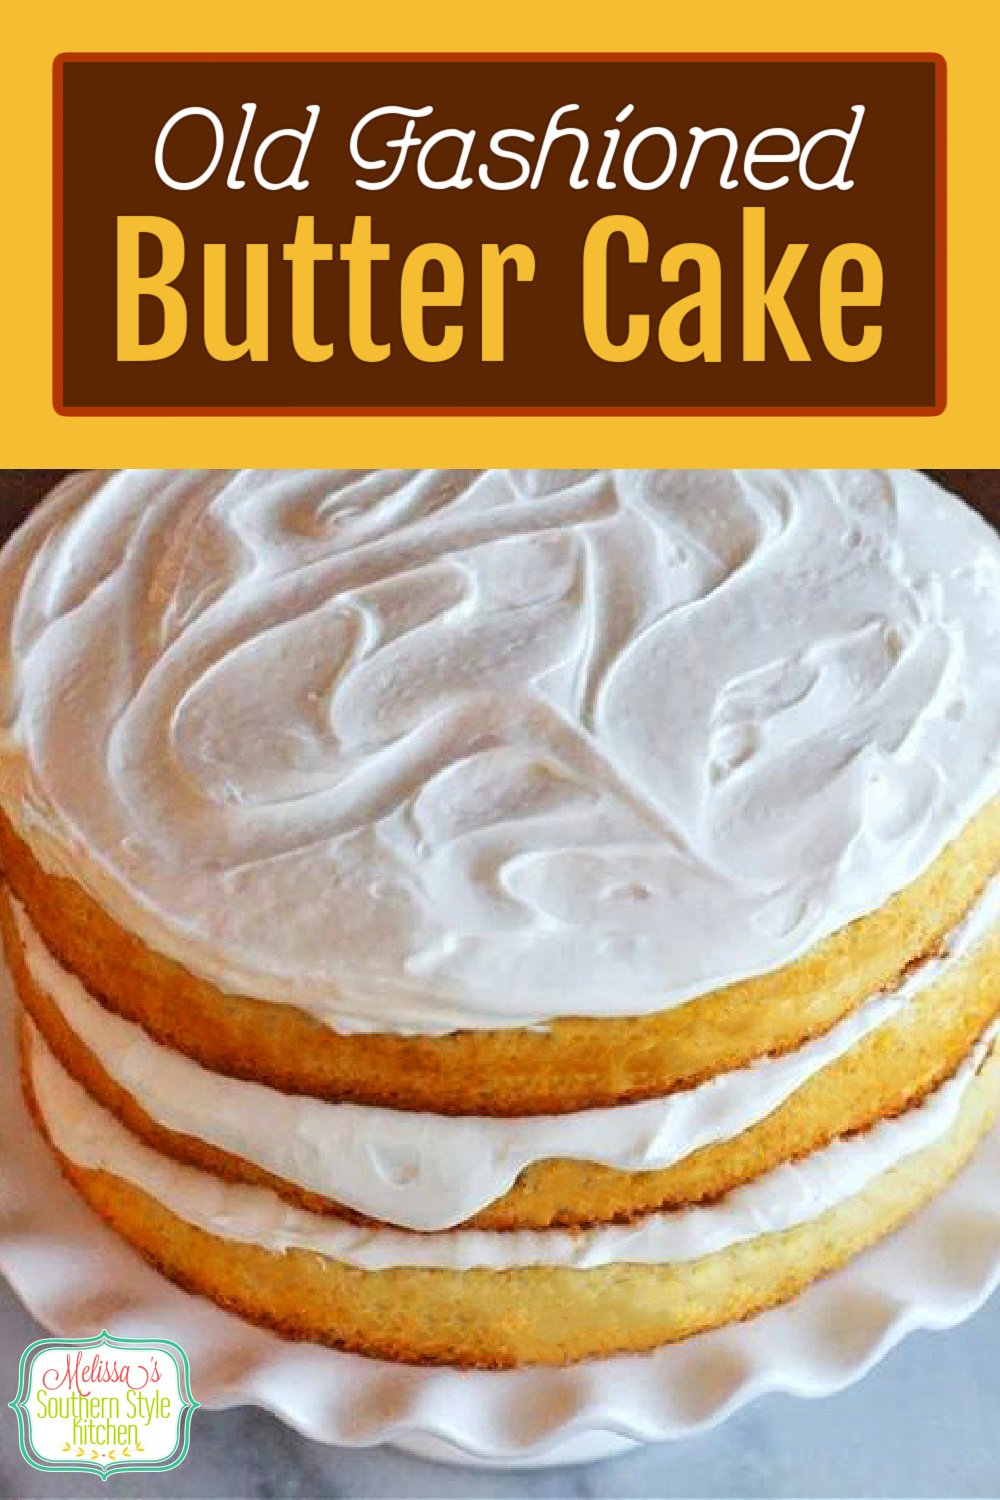 This Old Fashioned Butter Cake can be made in layers, as a sheet cake or turned into cupcakes #buttercake #yellowcake #homeadeyellowcakerecipe #cakes #cakerecipes #1234cake #dessertfoodrecipes #sweets #desserts #southernrecipes #southernfood #melissassouthernstylekitchen #holidaybaking #birthdaycake via @melissasssk